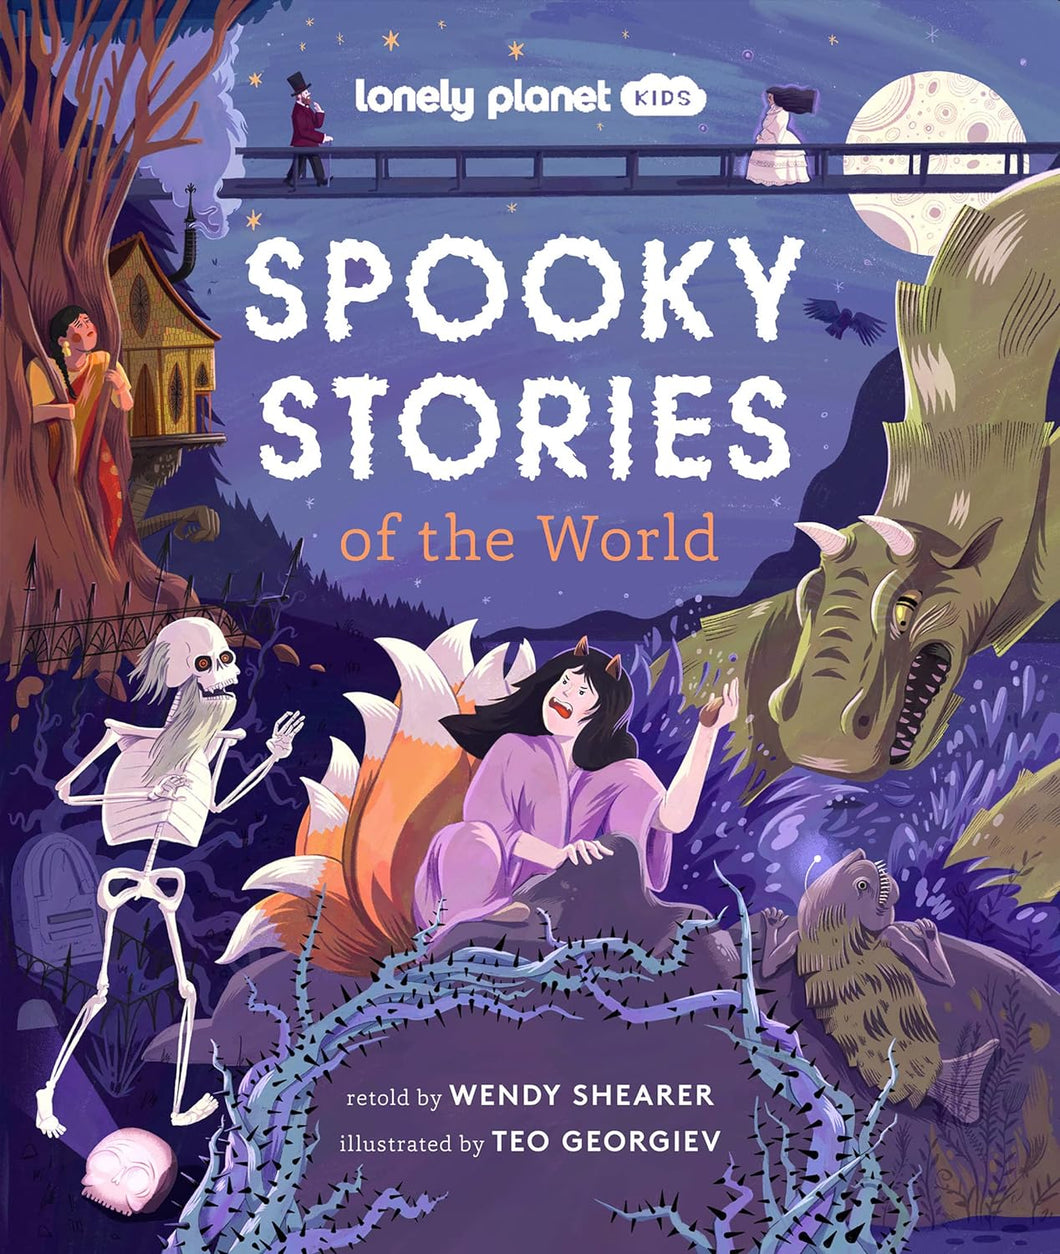 Lonely Planet Kids Spooky Stories of the World [Wendy Shearer & Teo Georgiev]